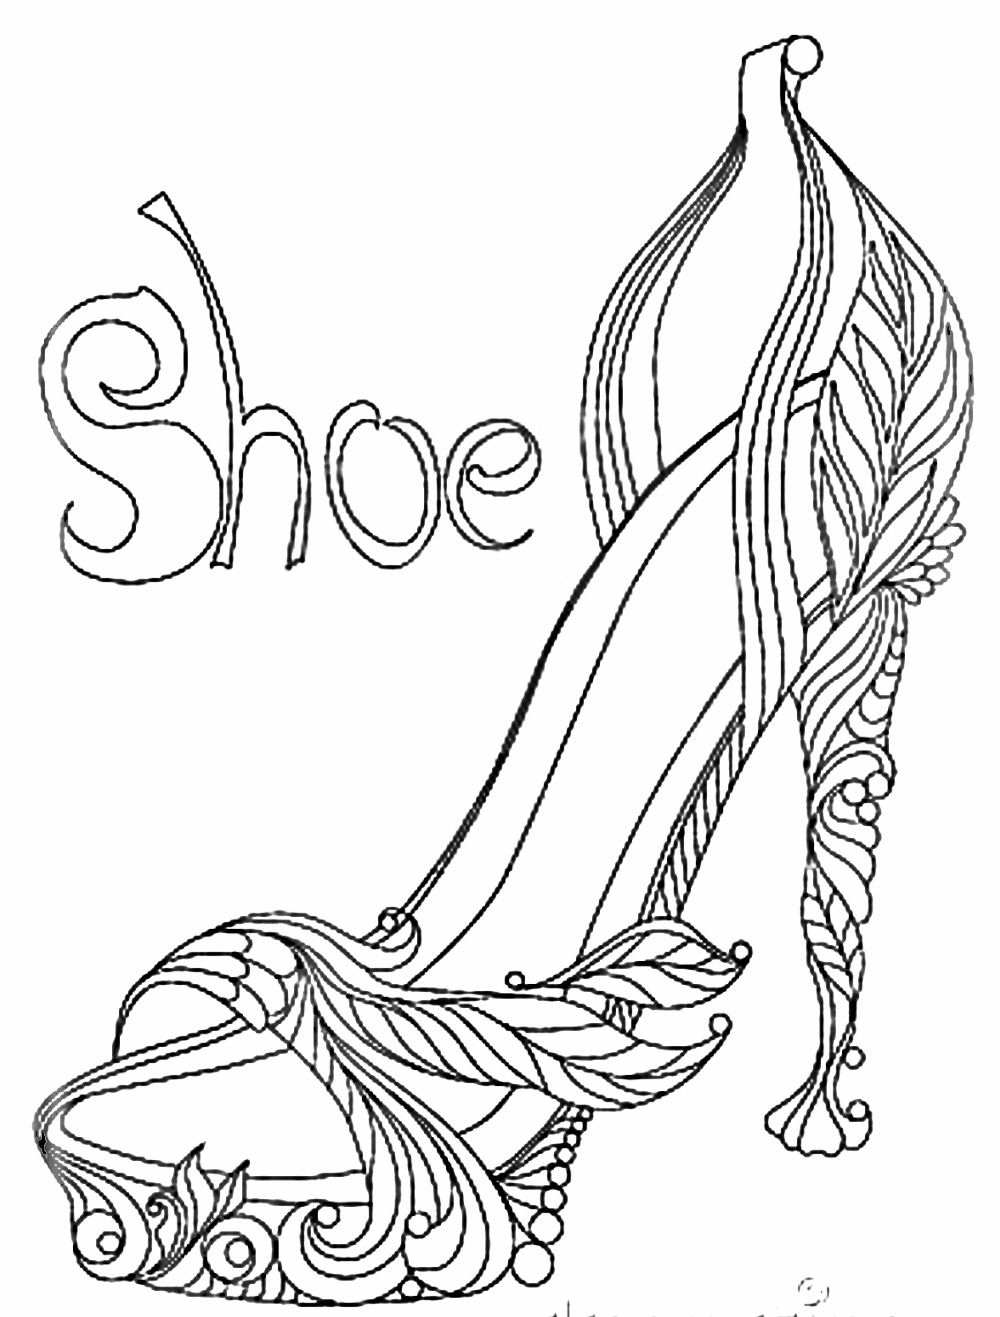 High heel shoe coloring page (With images) | People coloring pages ...